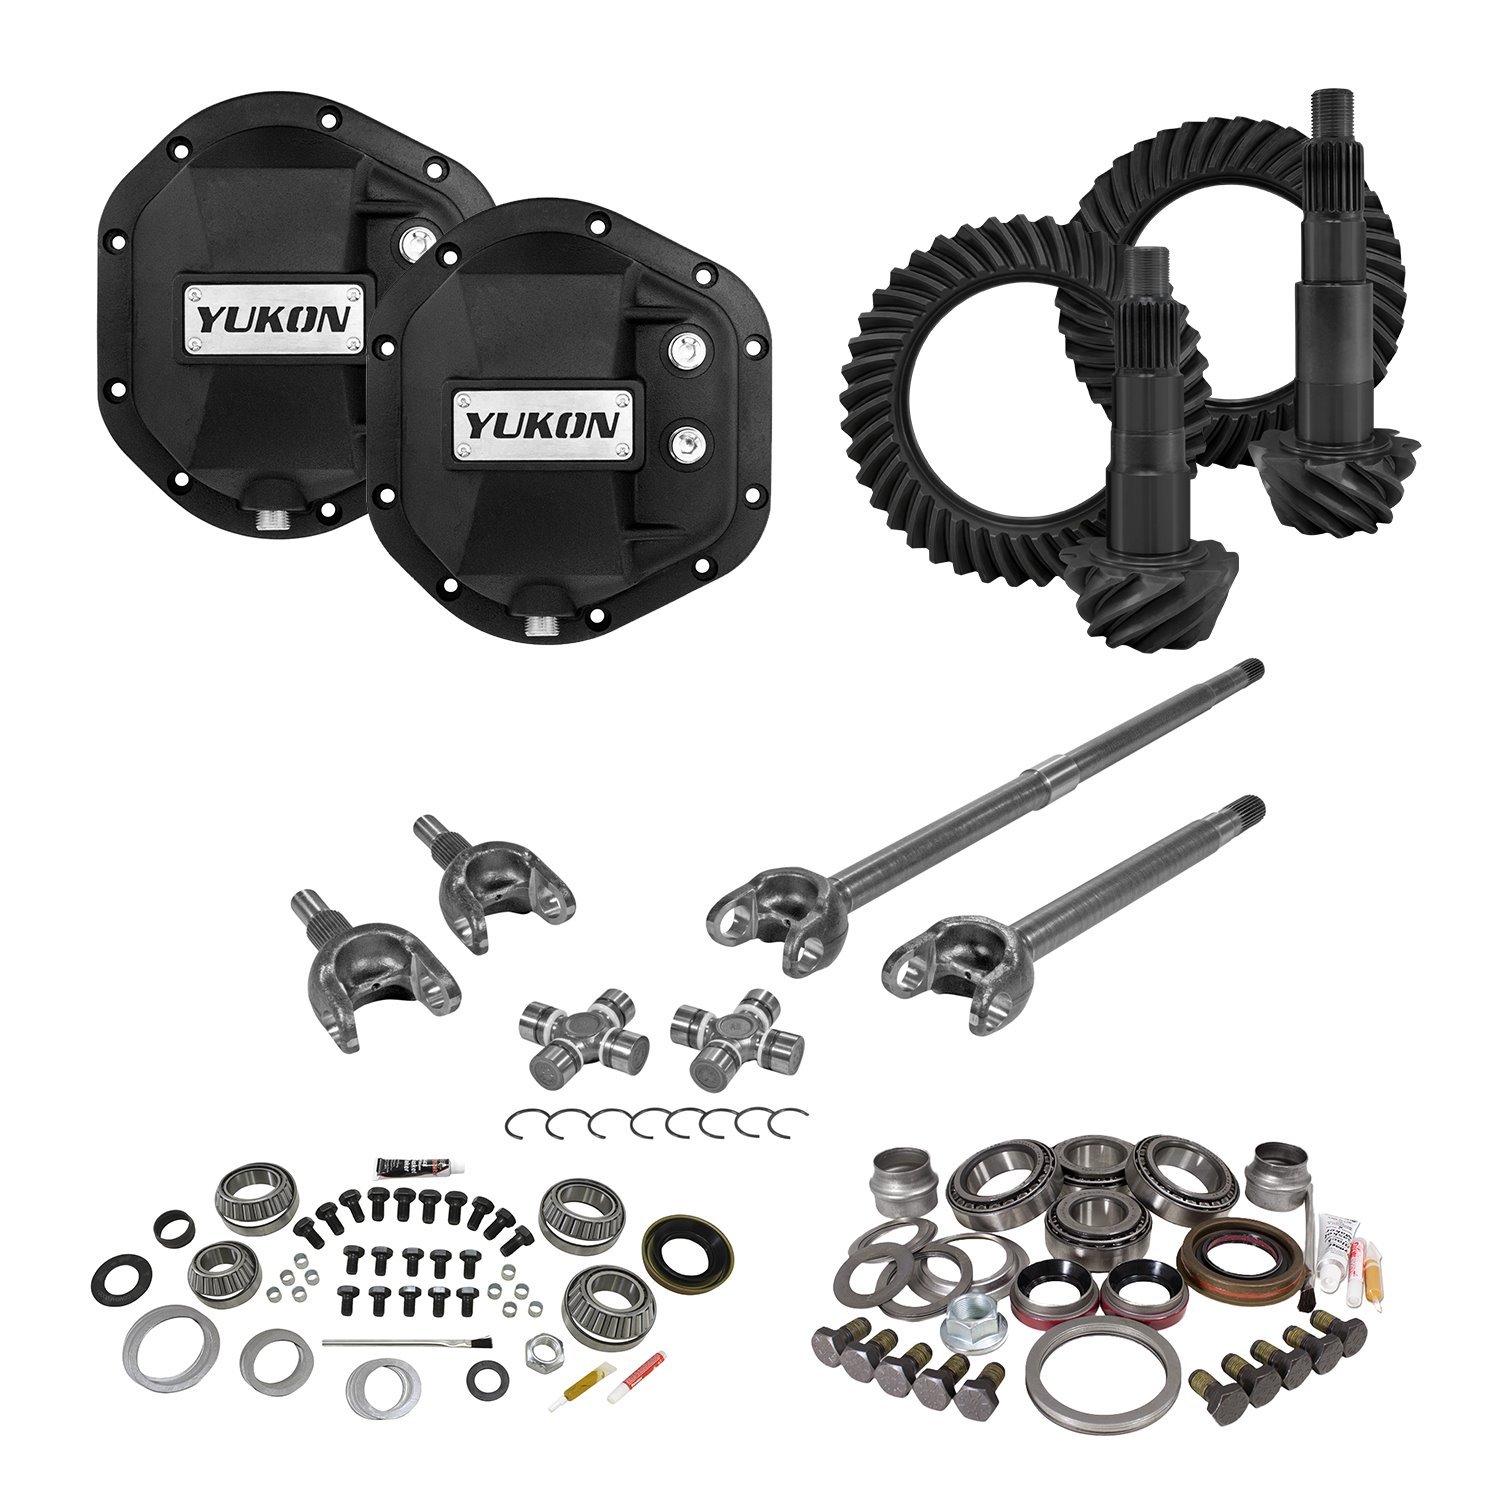 Stage 3 Jeep Jk Re-Gear Kit W/Covers, Front Axles, Dana 44, 4.56 Ratio